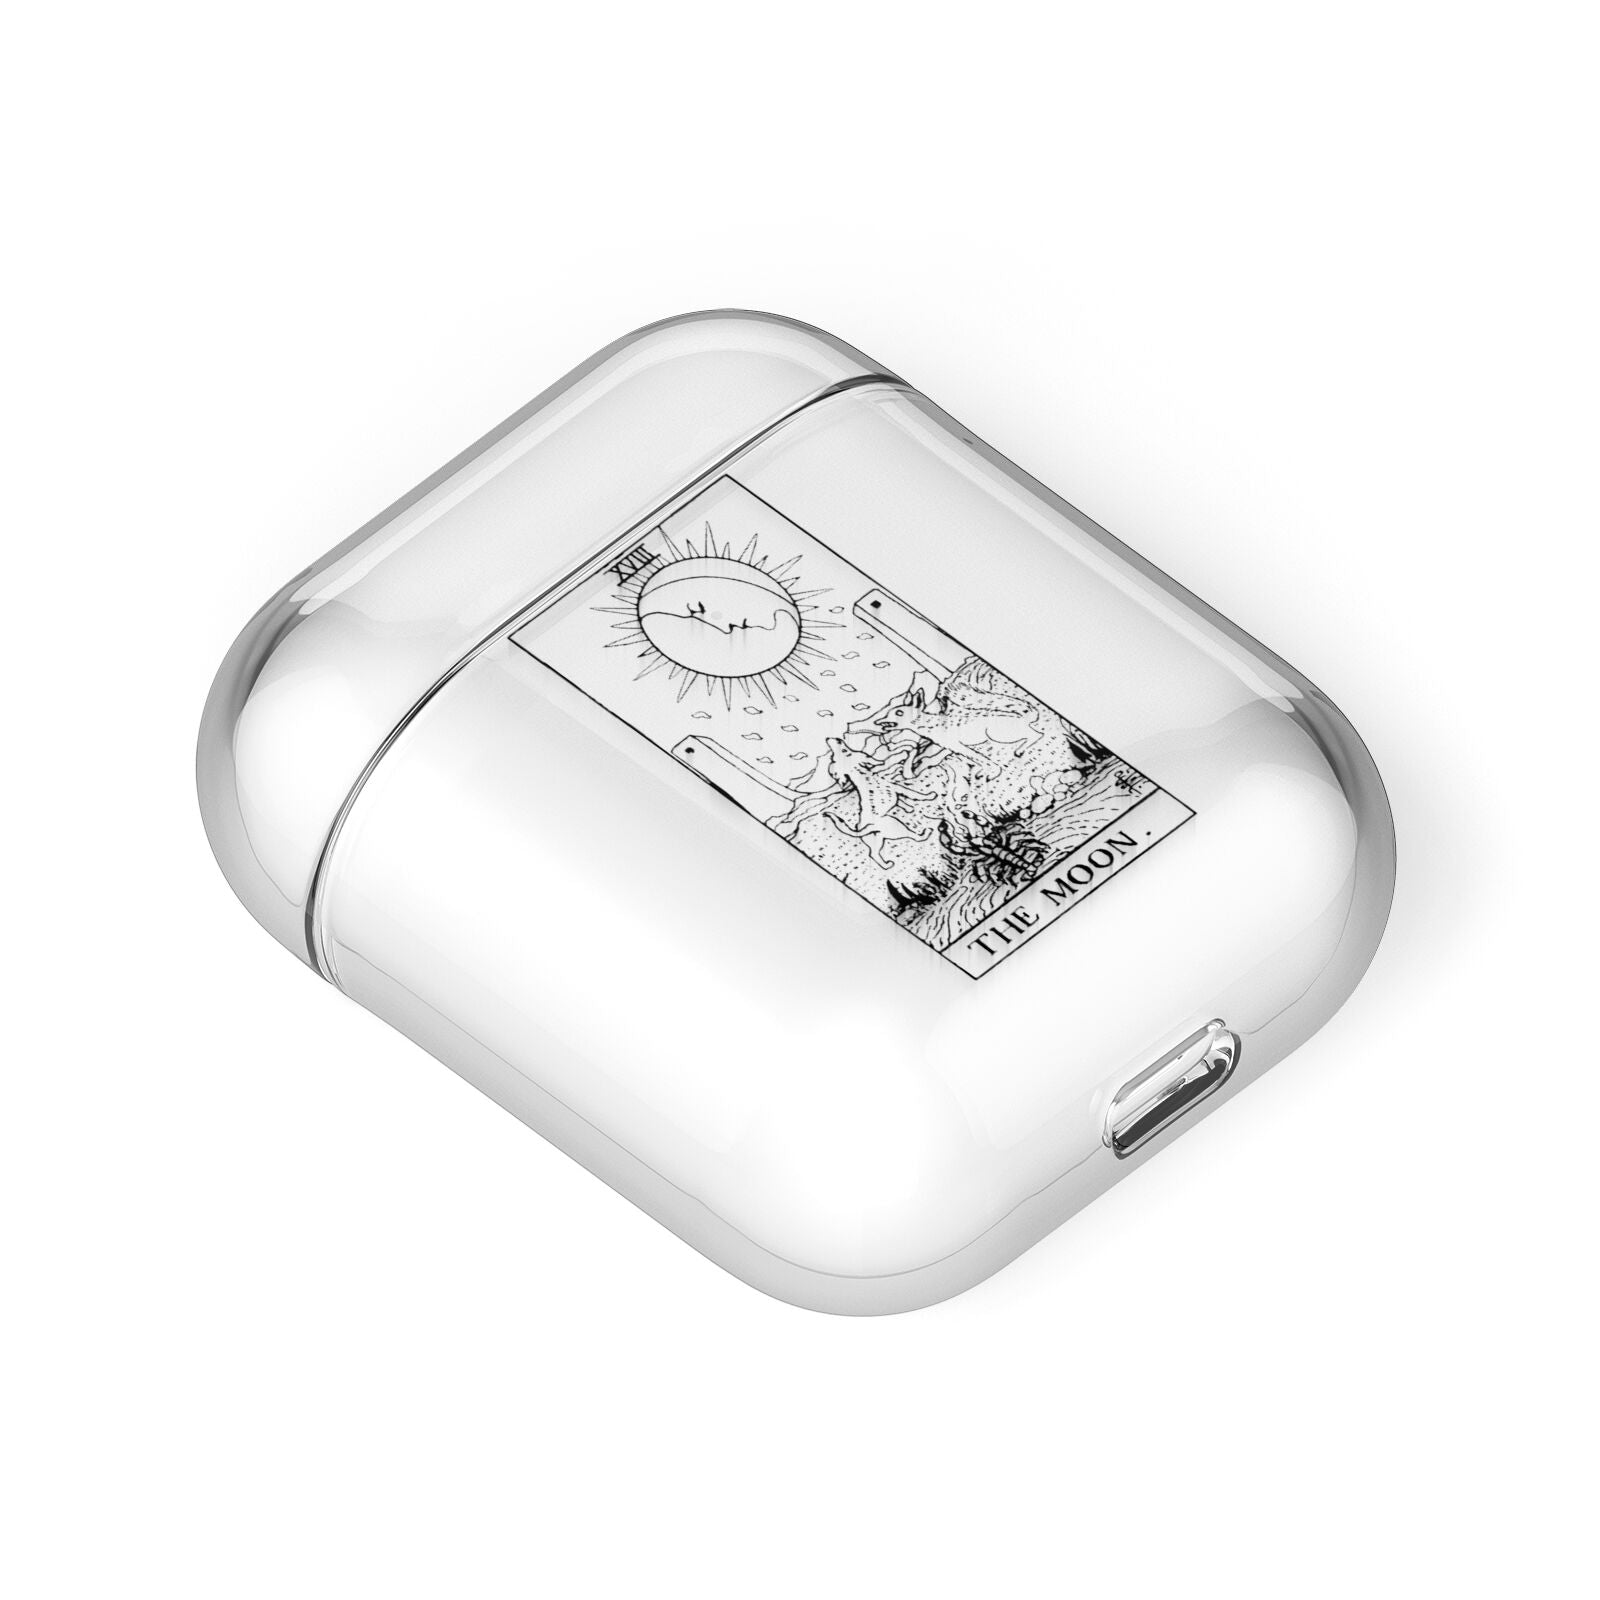 The Moon Monochrome AirPods Case Laid Flat